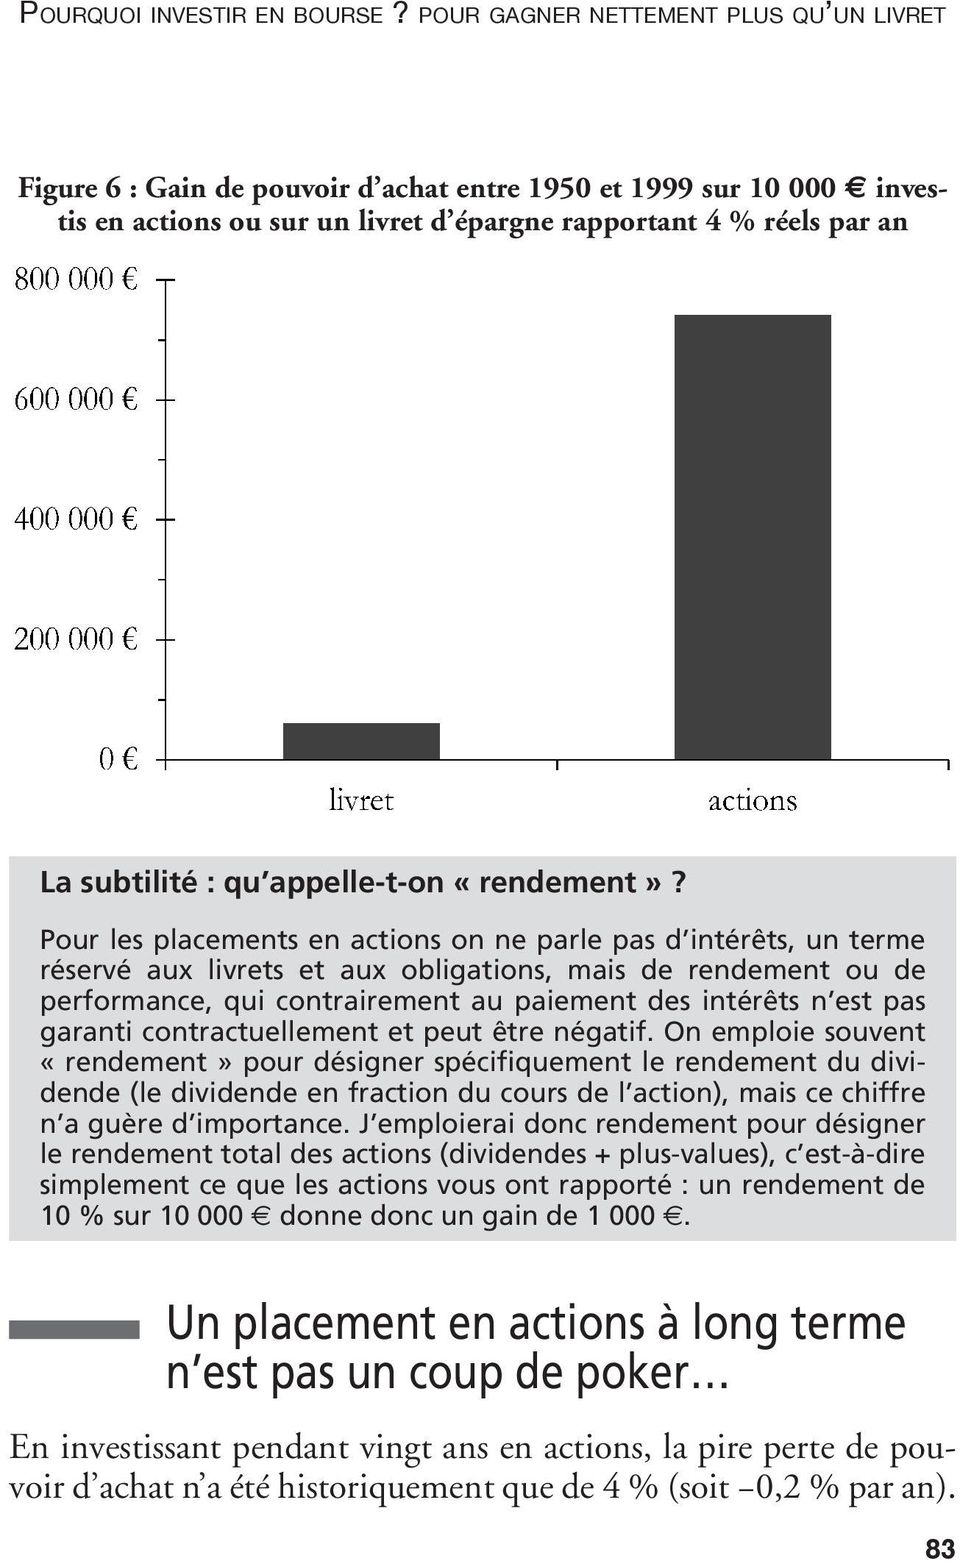 appelle-t-on «rendement»?